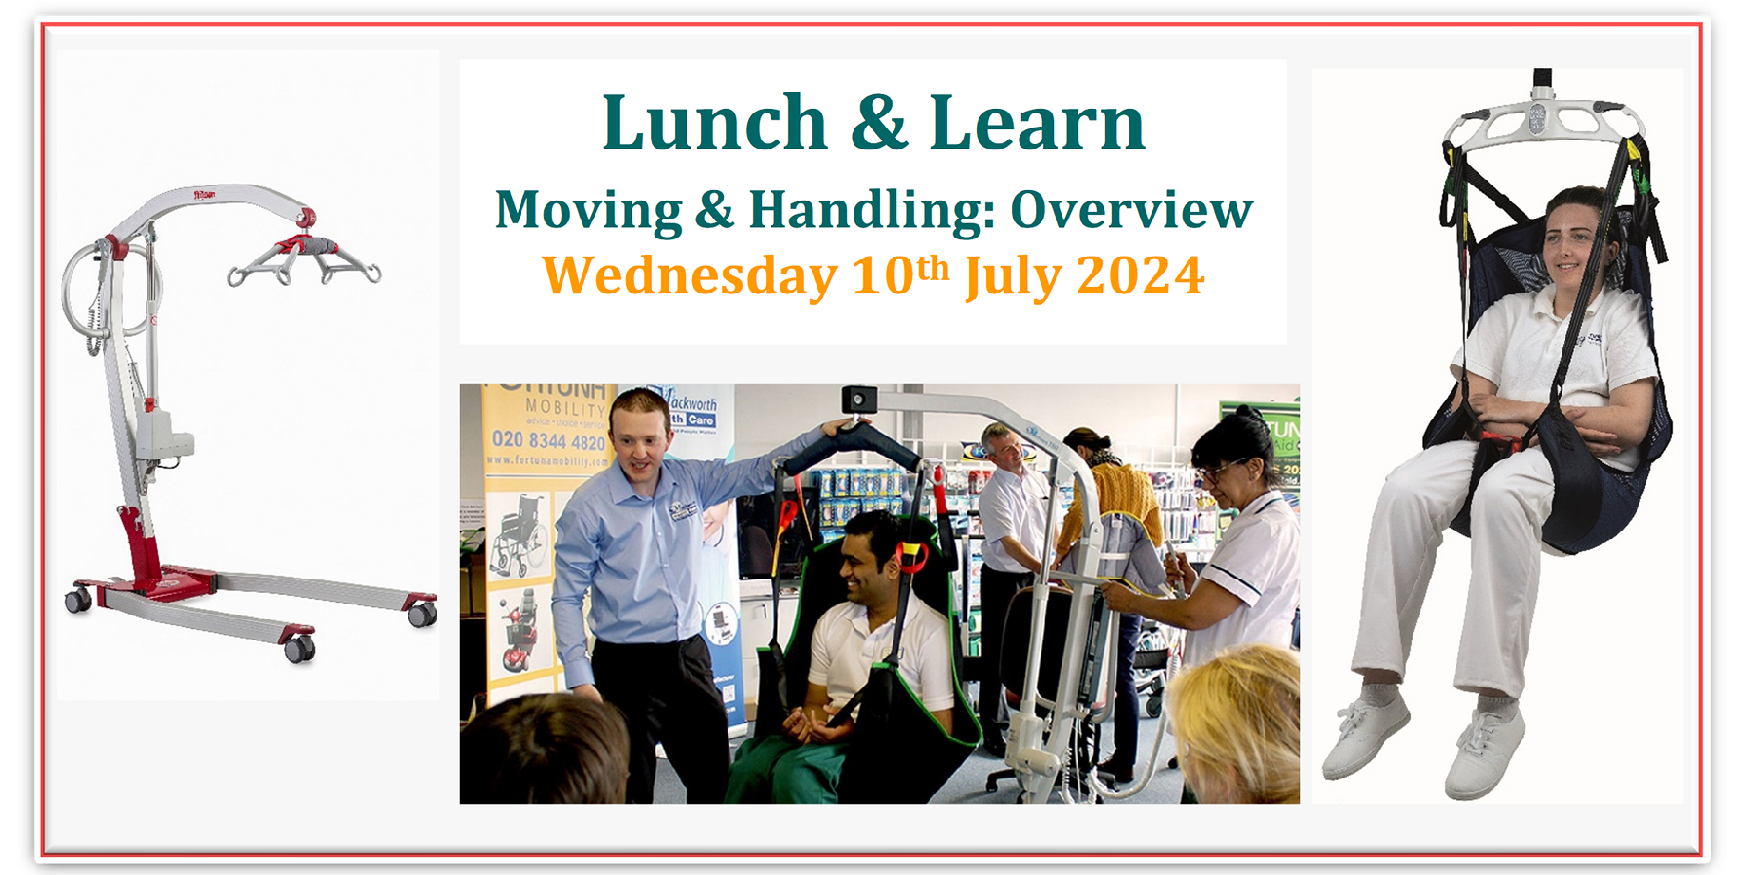 Lunch & Learn - Overview of Moving & Handling: Hoists, Slings, Regulations (Testing and Training)